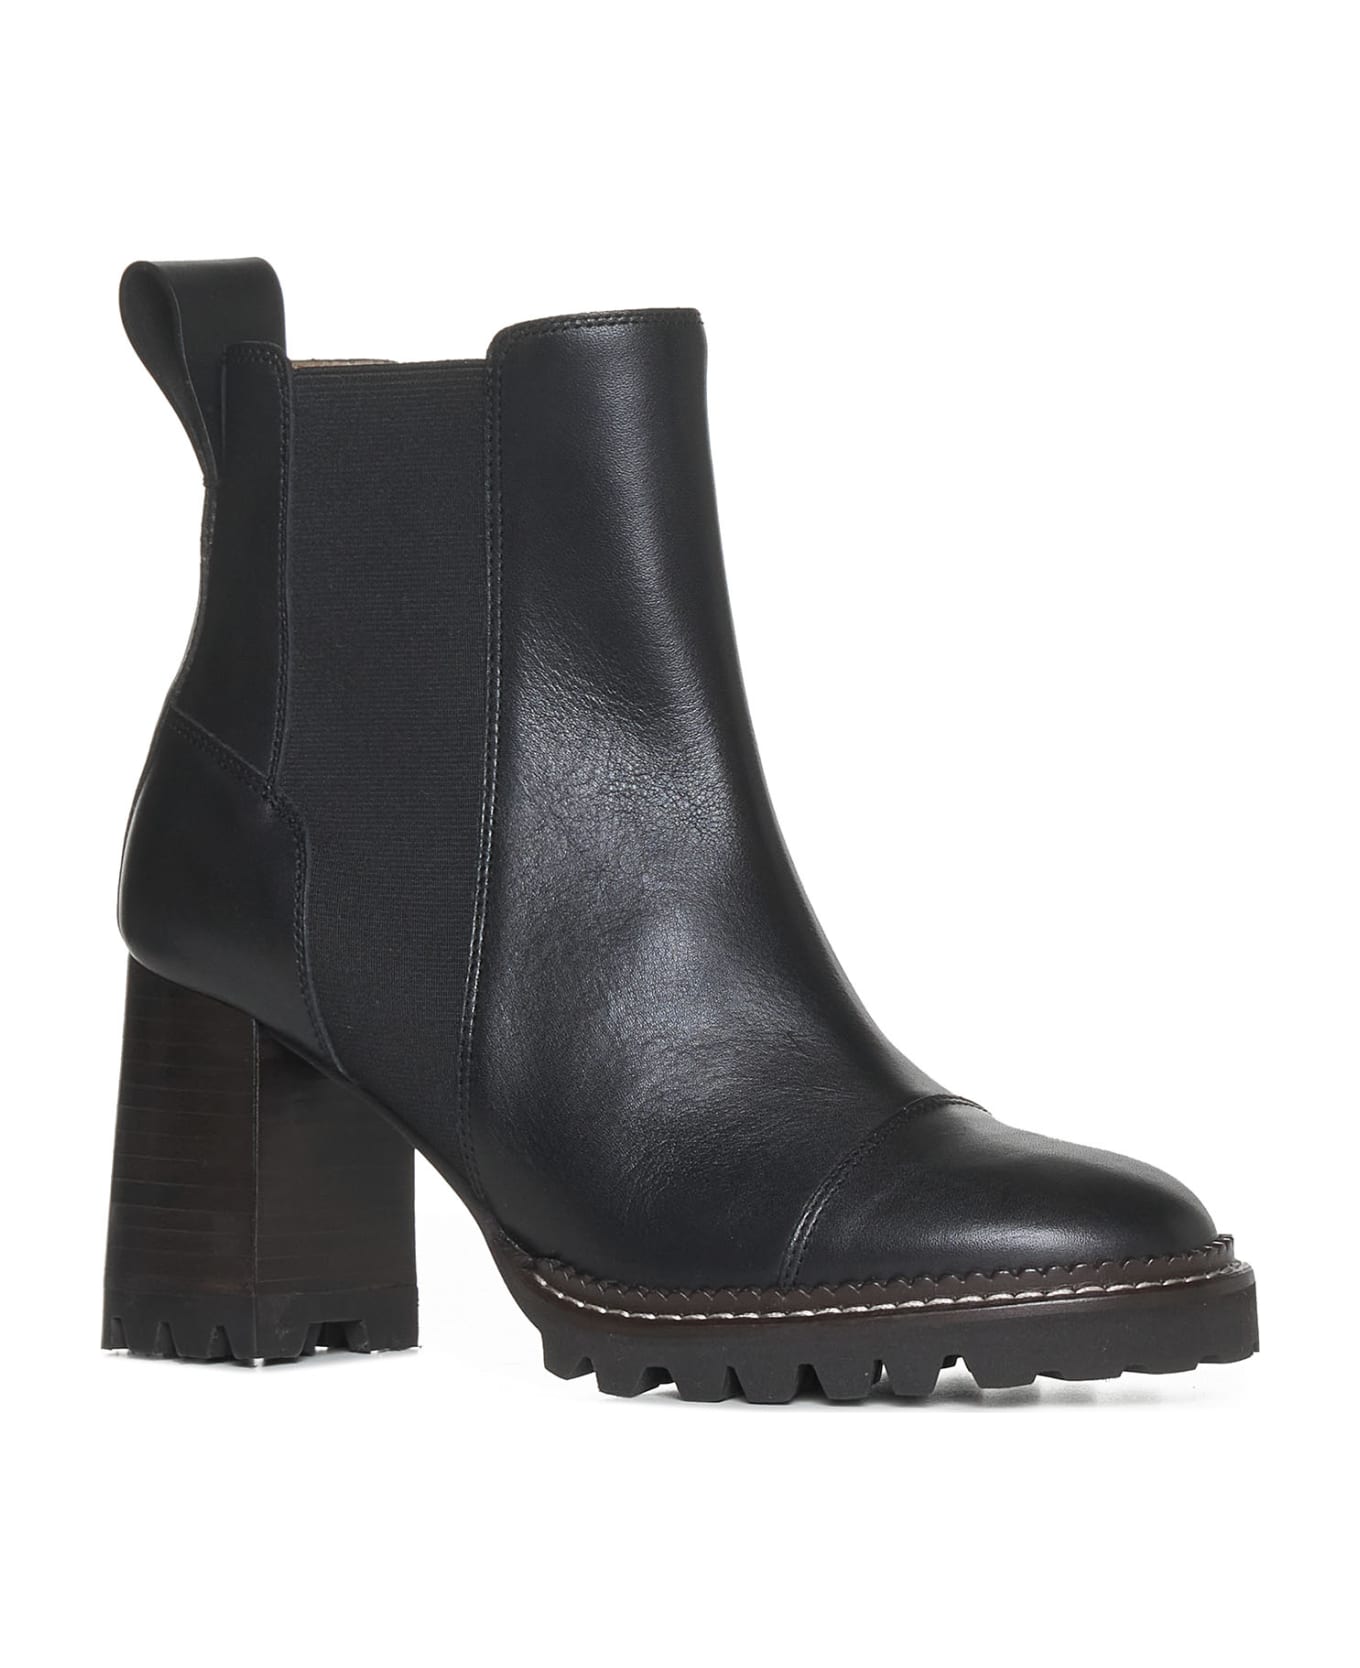 See by Chloé Boots - Black